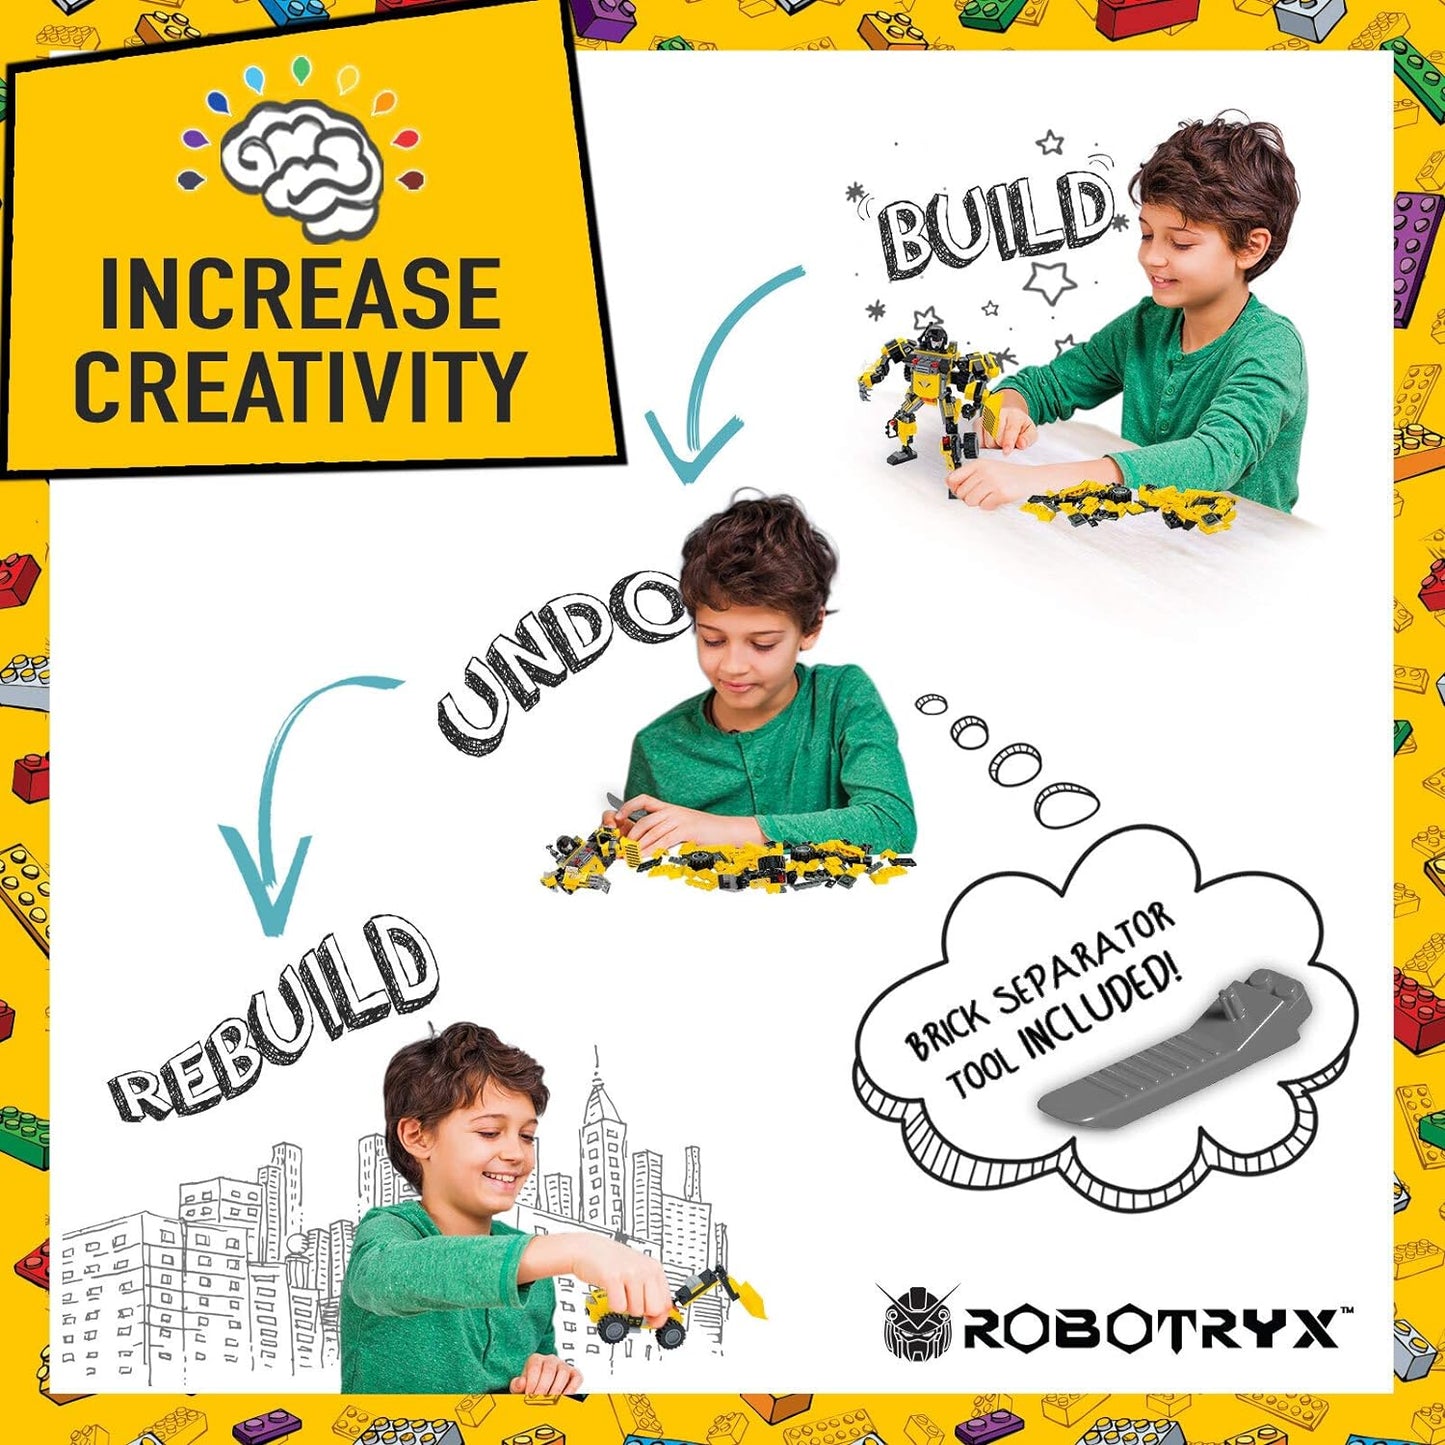 Robot Building Toy Gift for Boys, Perfect STEM Gift for Builders Ages 6, 7, 8, 9, and 10 Year Olds, Yellow Zakarpian (238 Pcs) Robotryx